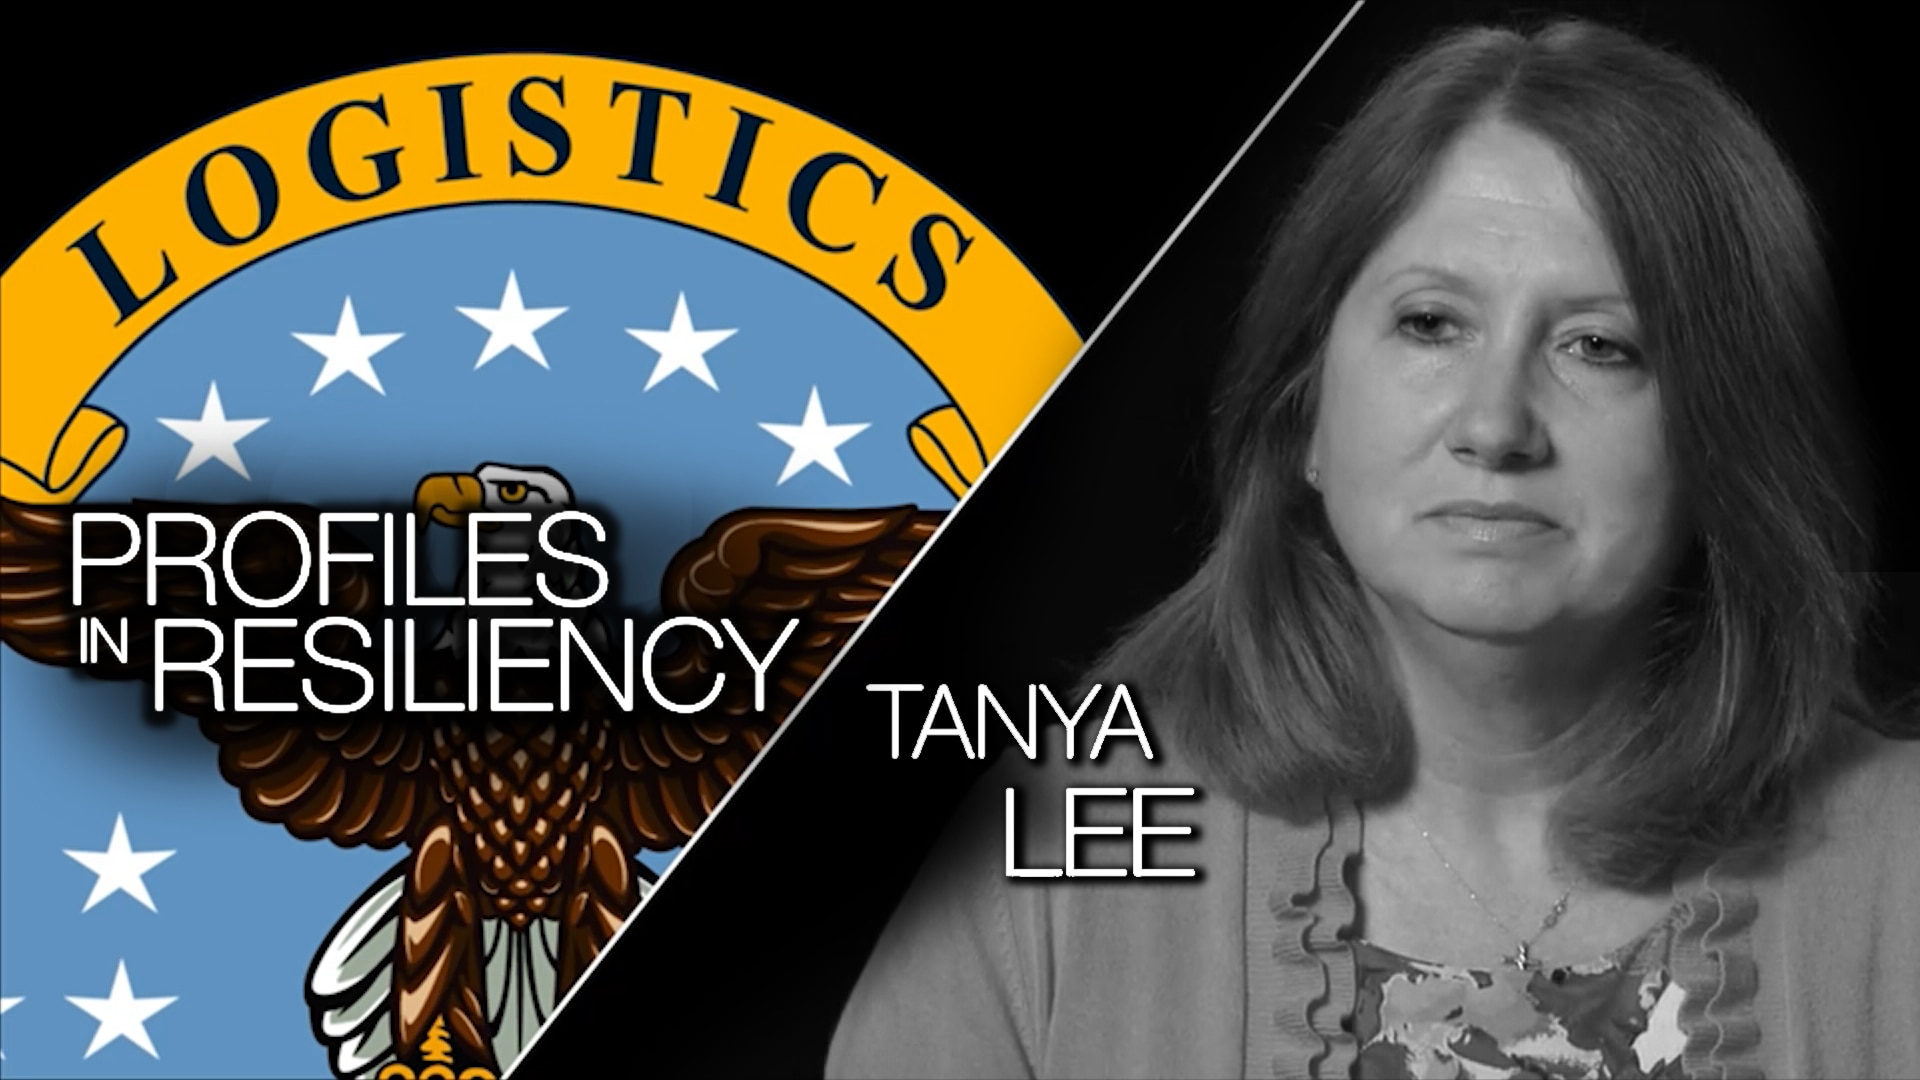 In a new video, DLA employee Tanya Lee describes how she found new reserves of resiliency after being diagnosed with a serious medical condition.